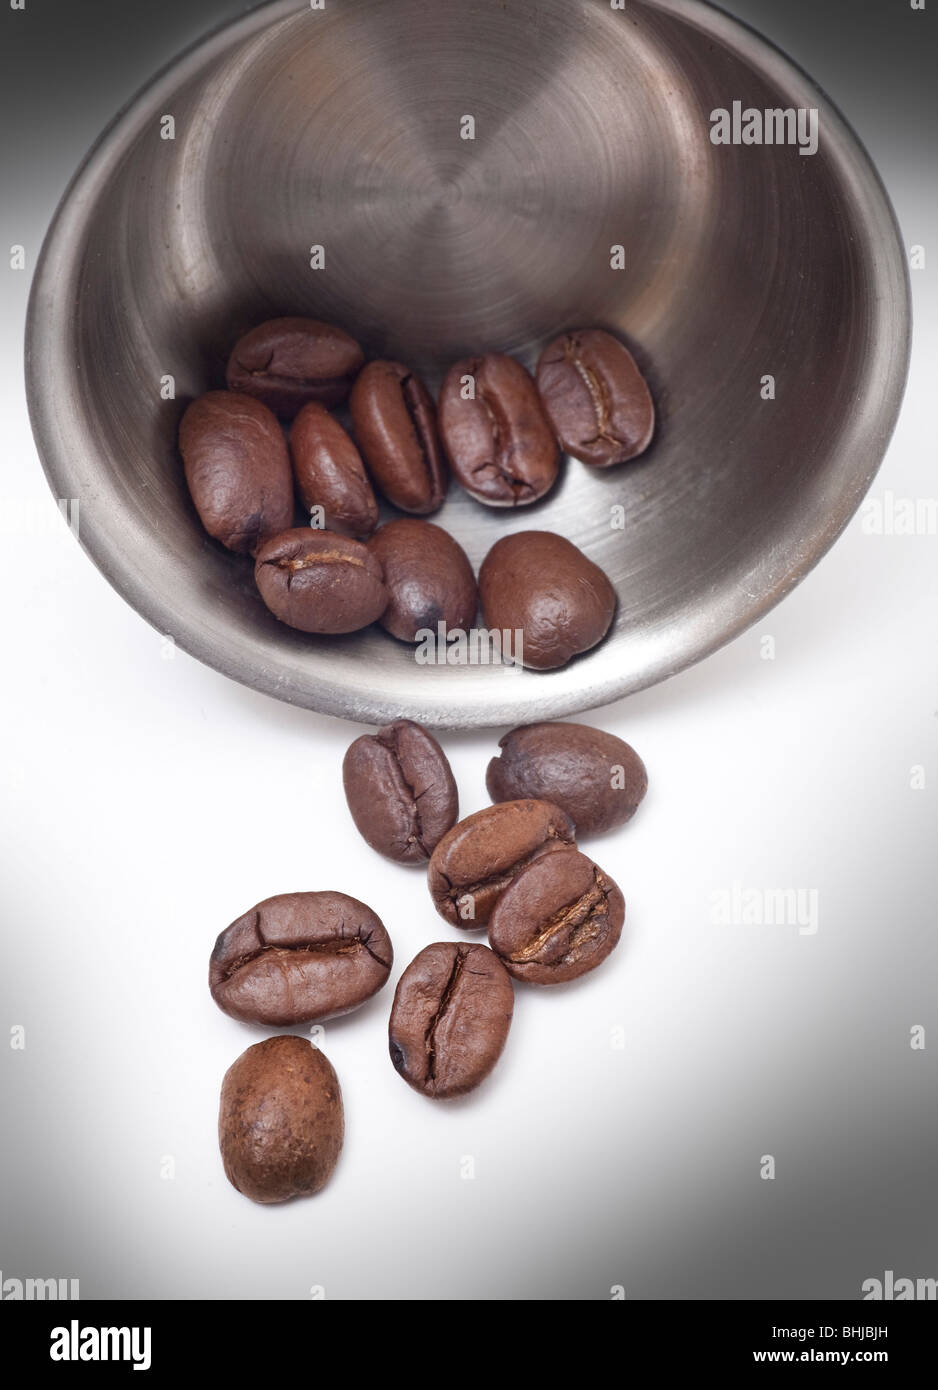 Roasted coffee beans in a metal cup Stock Photo